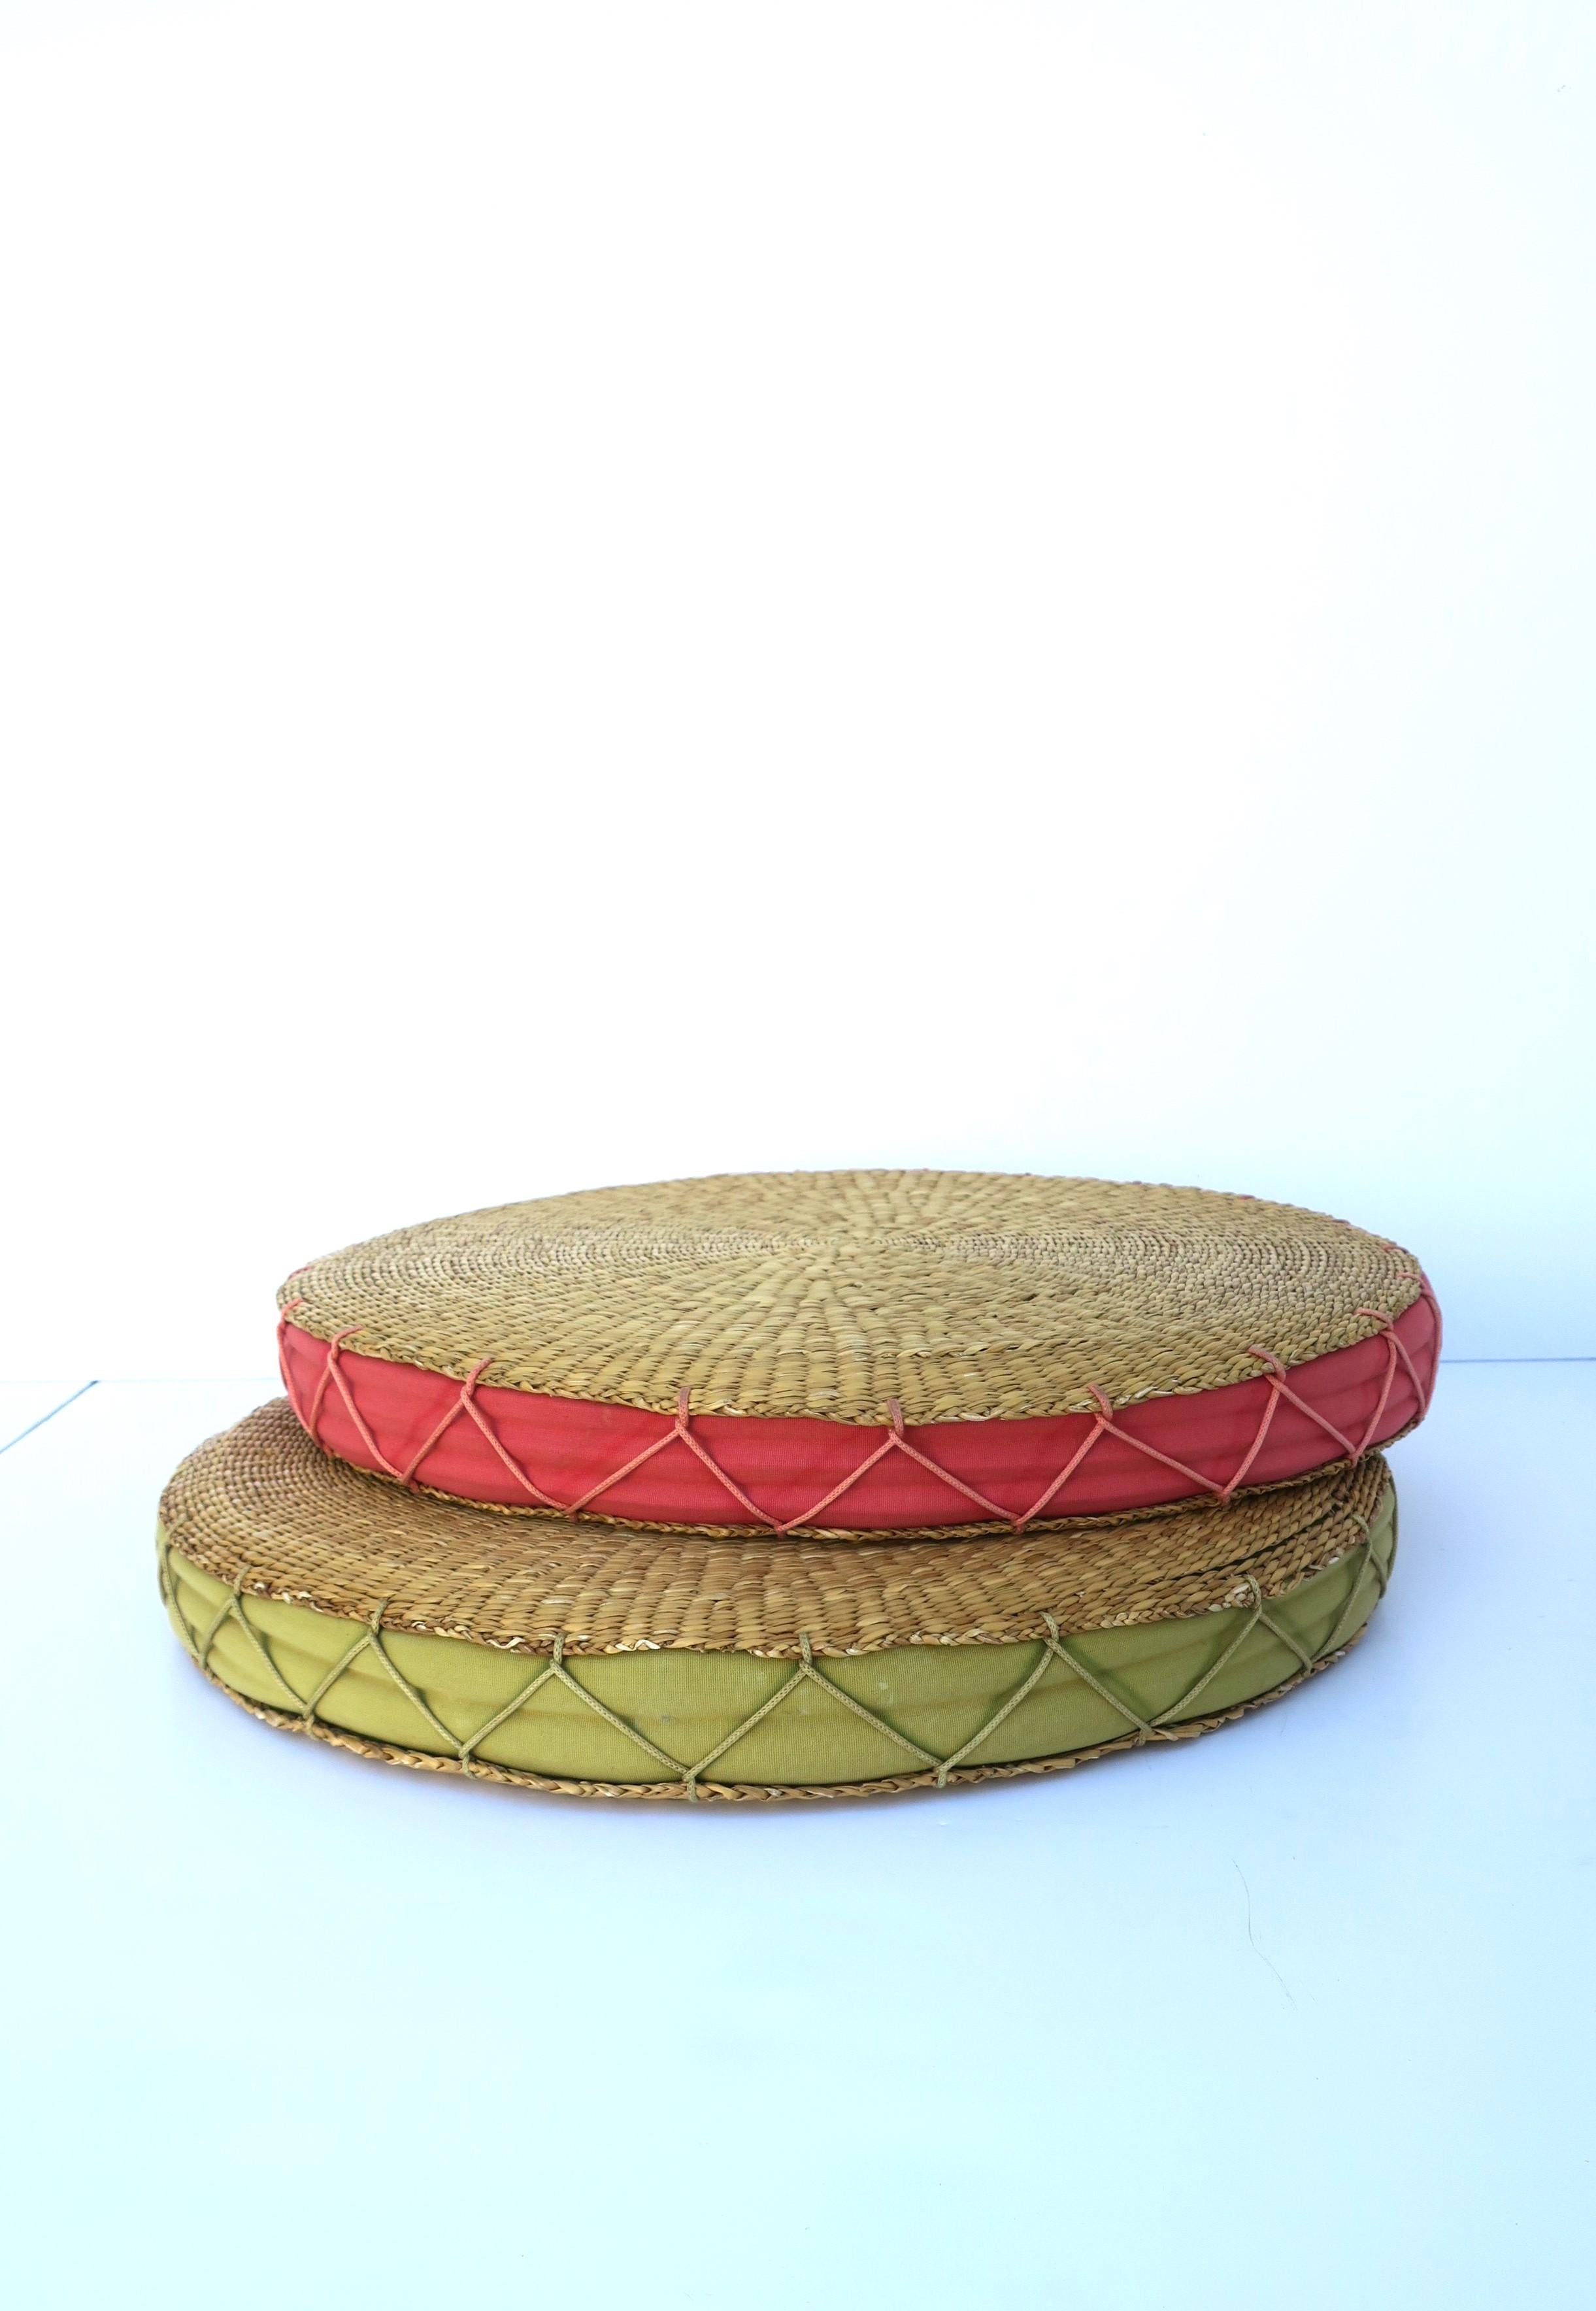 Cotton Wicker Seat or Floor Cushion, Watermelon Pink and Tan For Sale